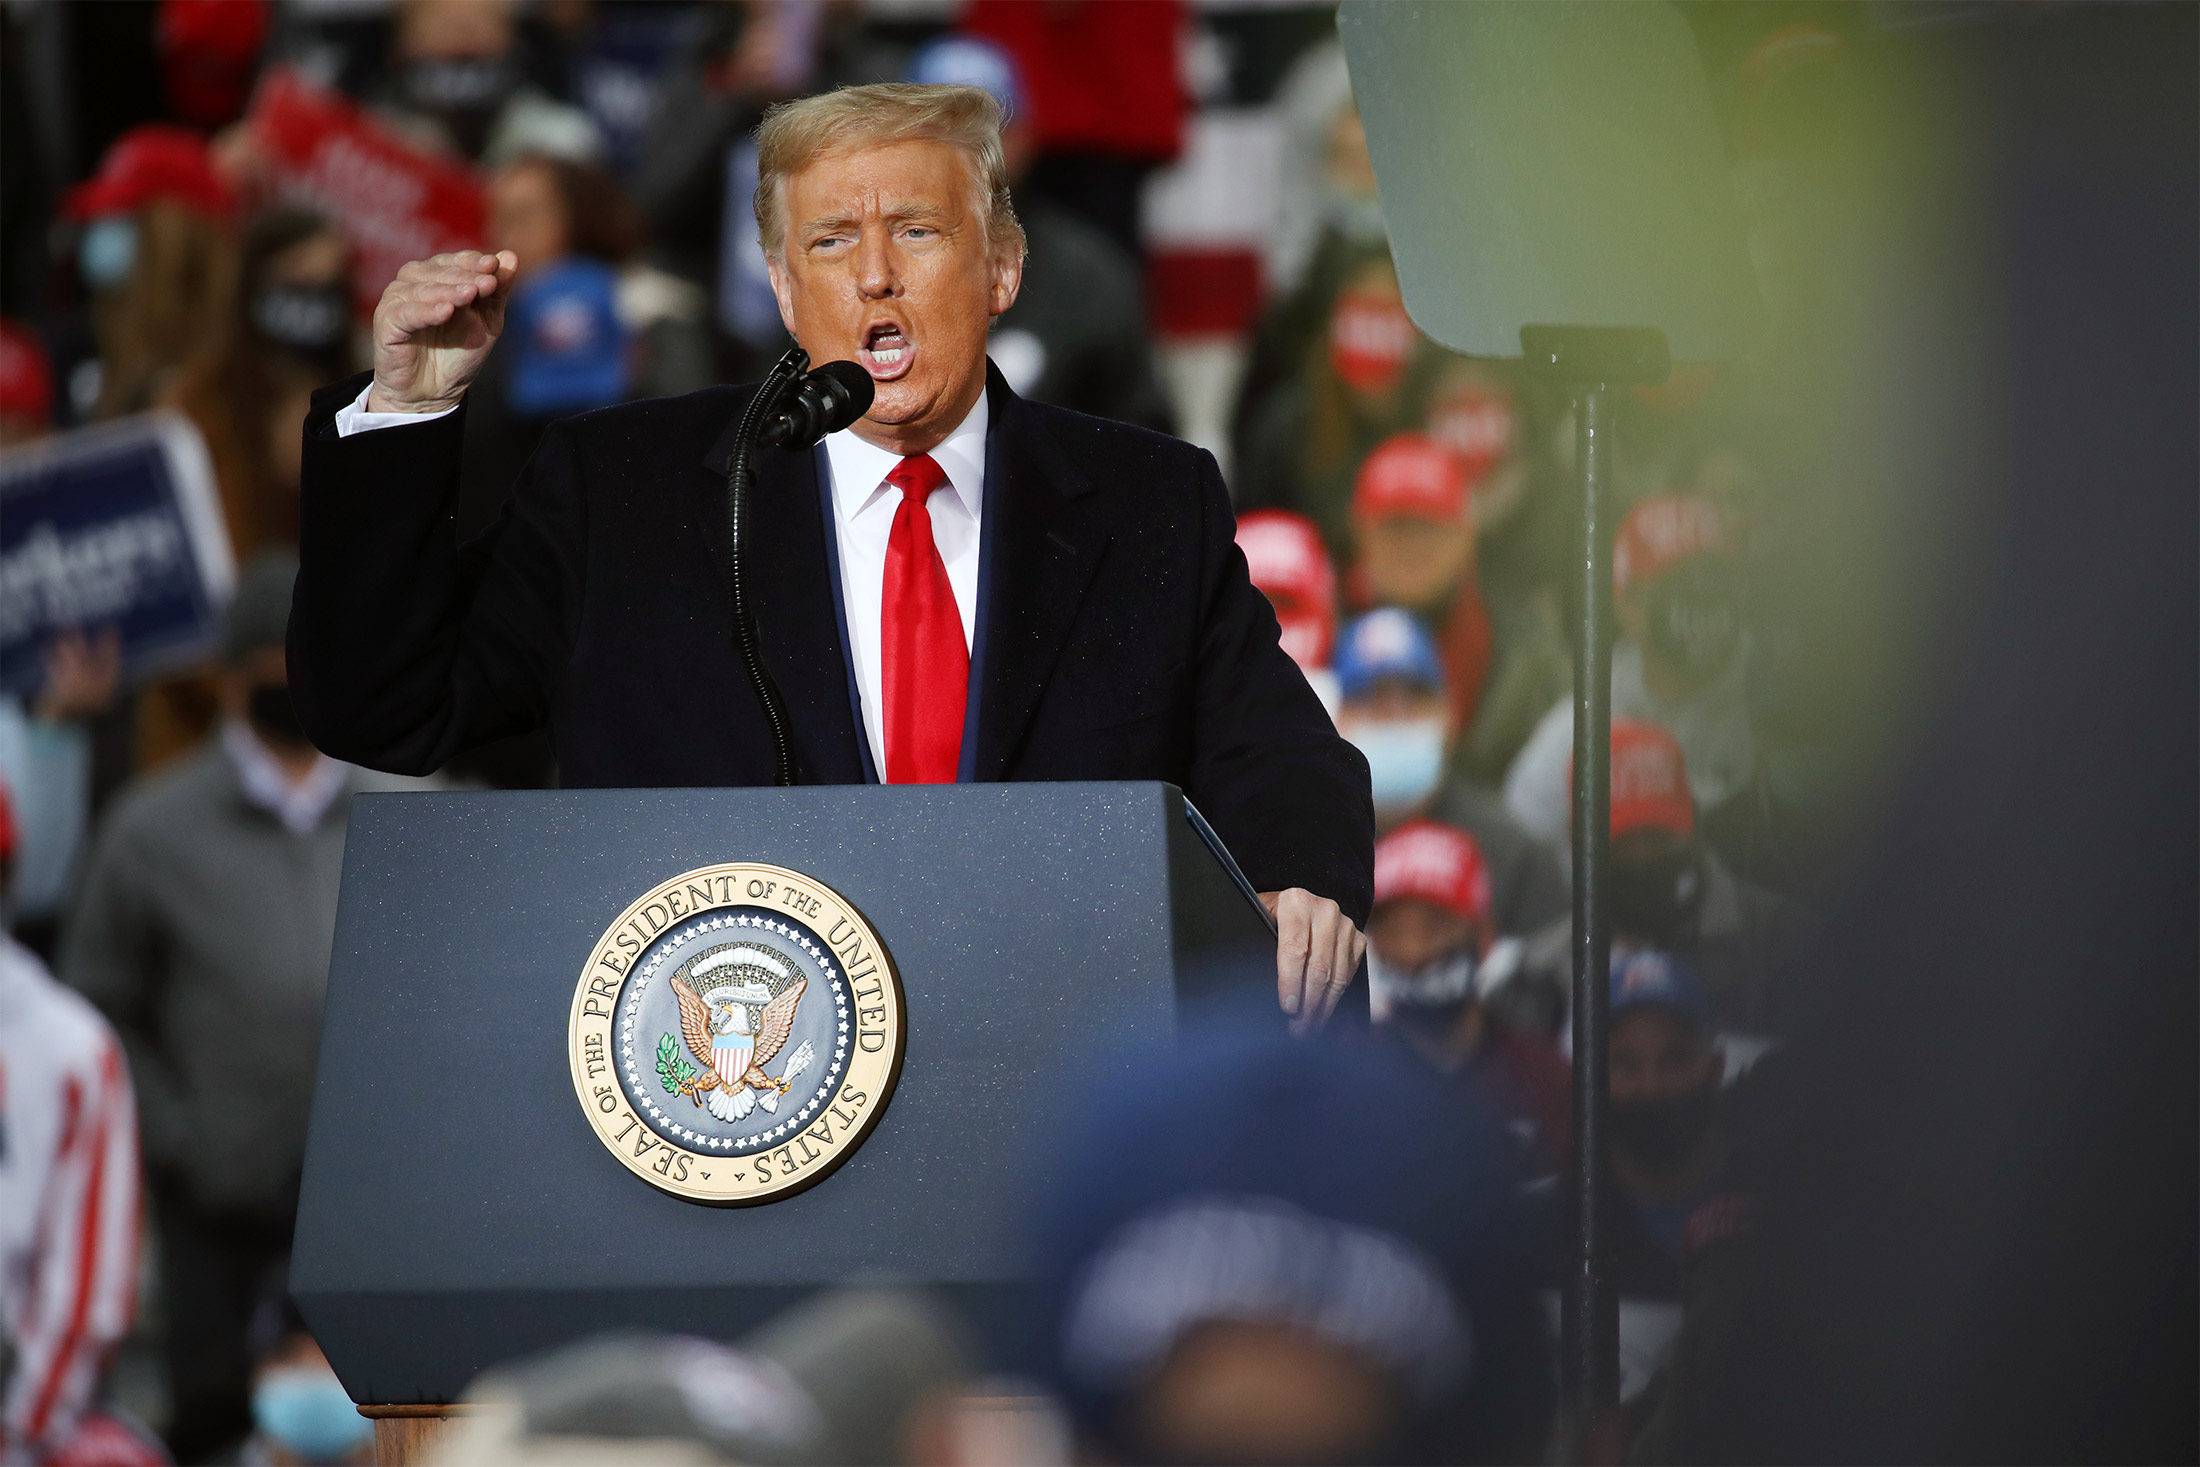 President Donald Trump delivers remarks at a rally in Allentown, Pennsylvania, on Oct. 26.